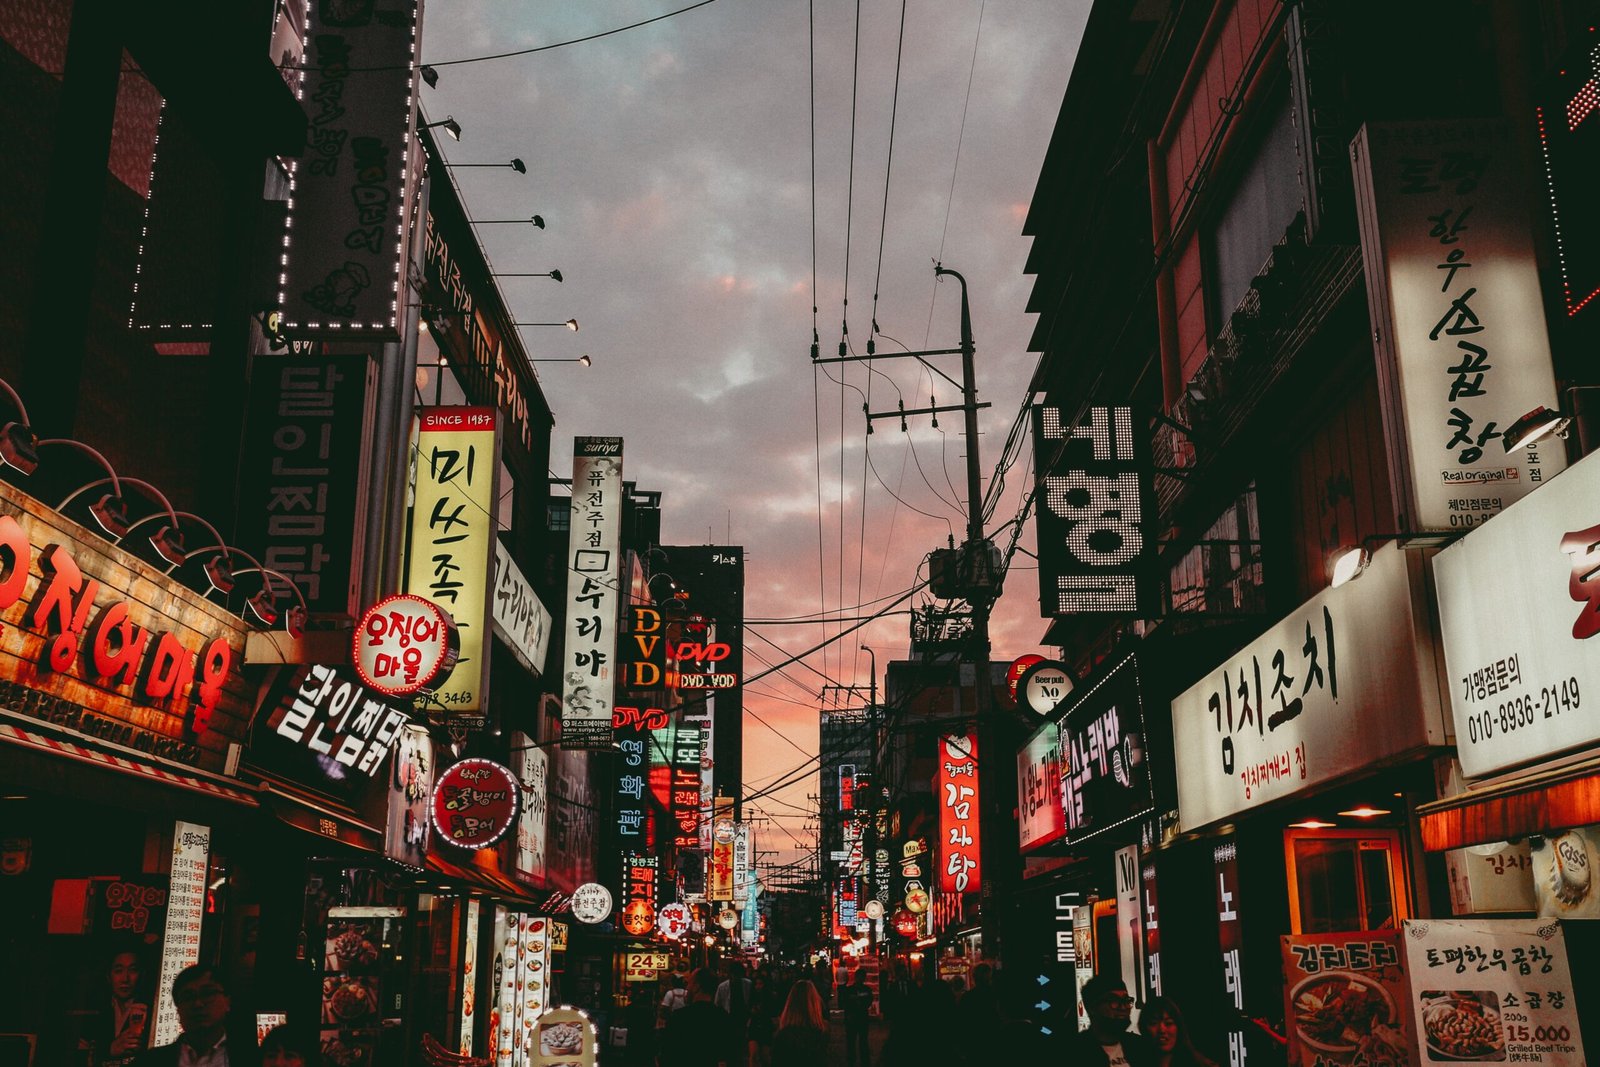 Picture of advertising along a crowded street in South Korea at night.